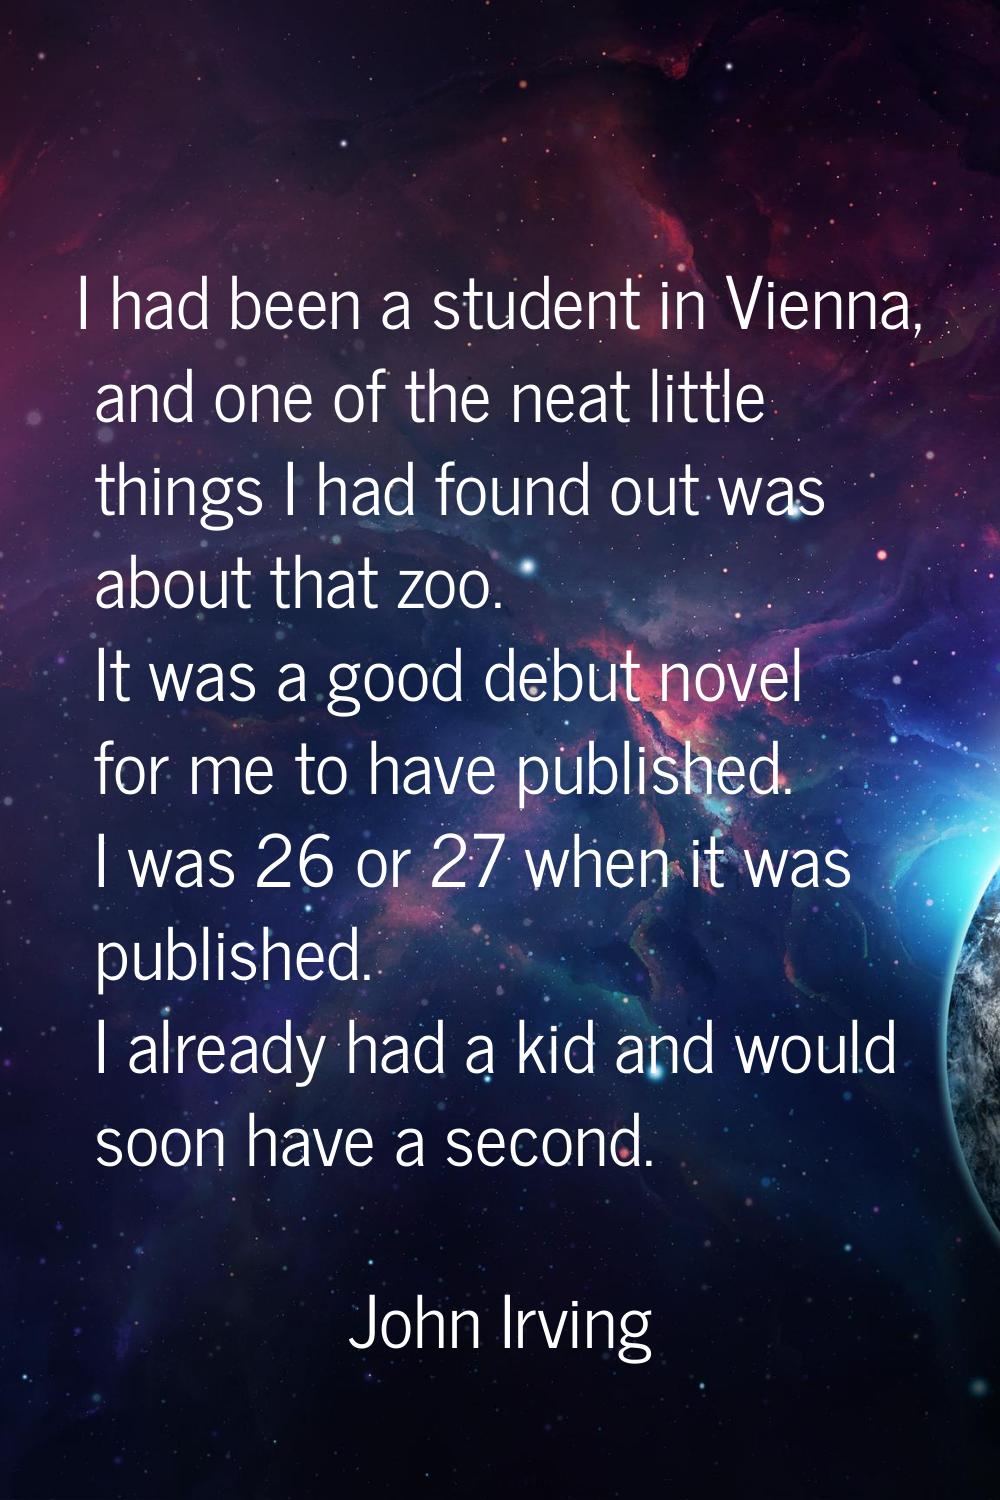 I had been a student in Vienna, and one of the neat little things I had found out was about that zo